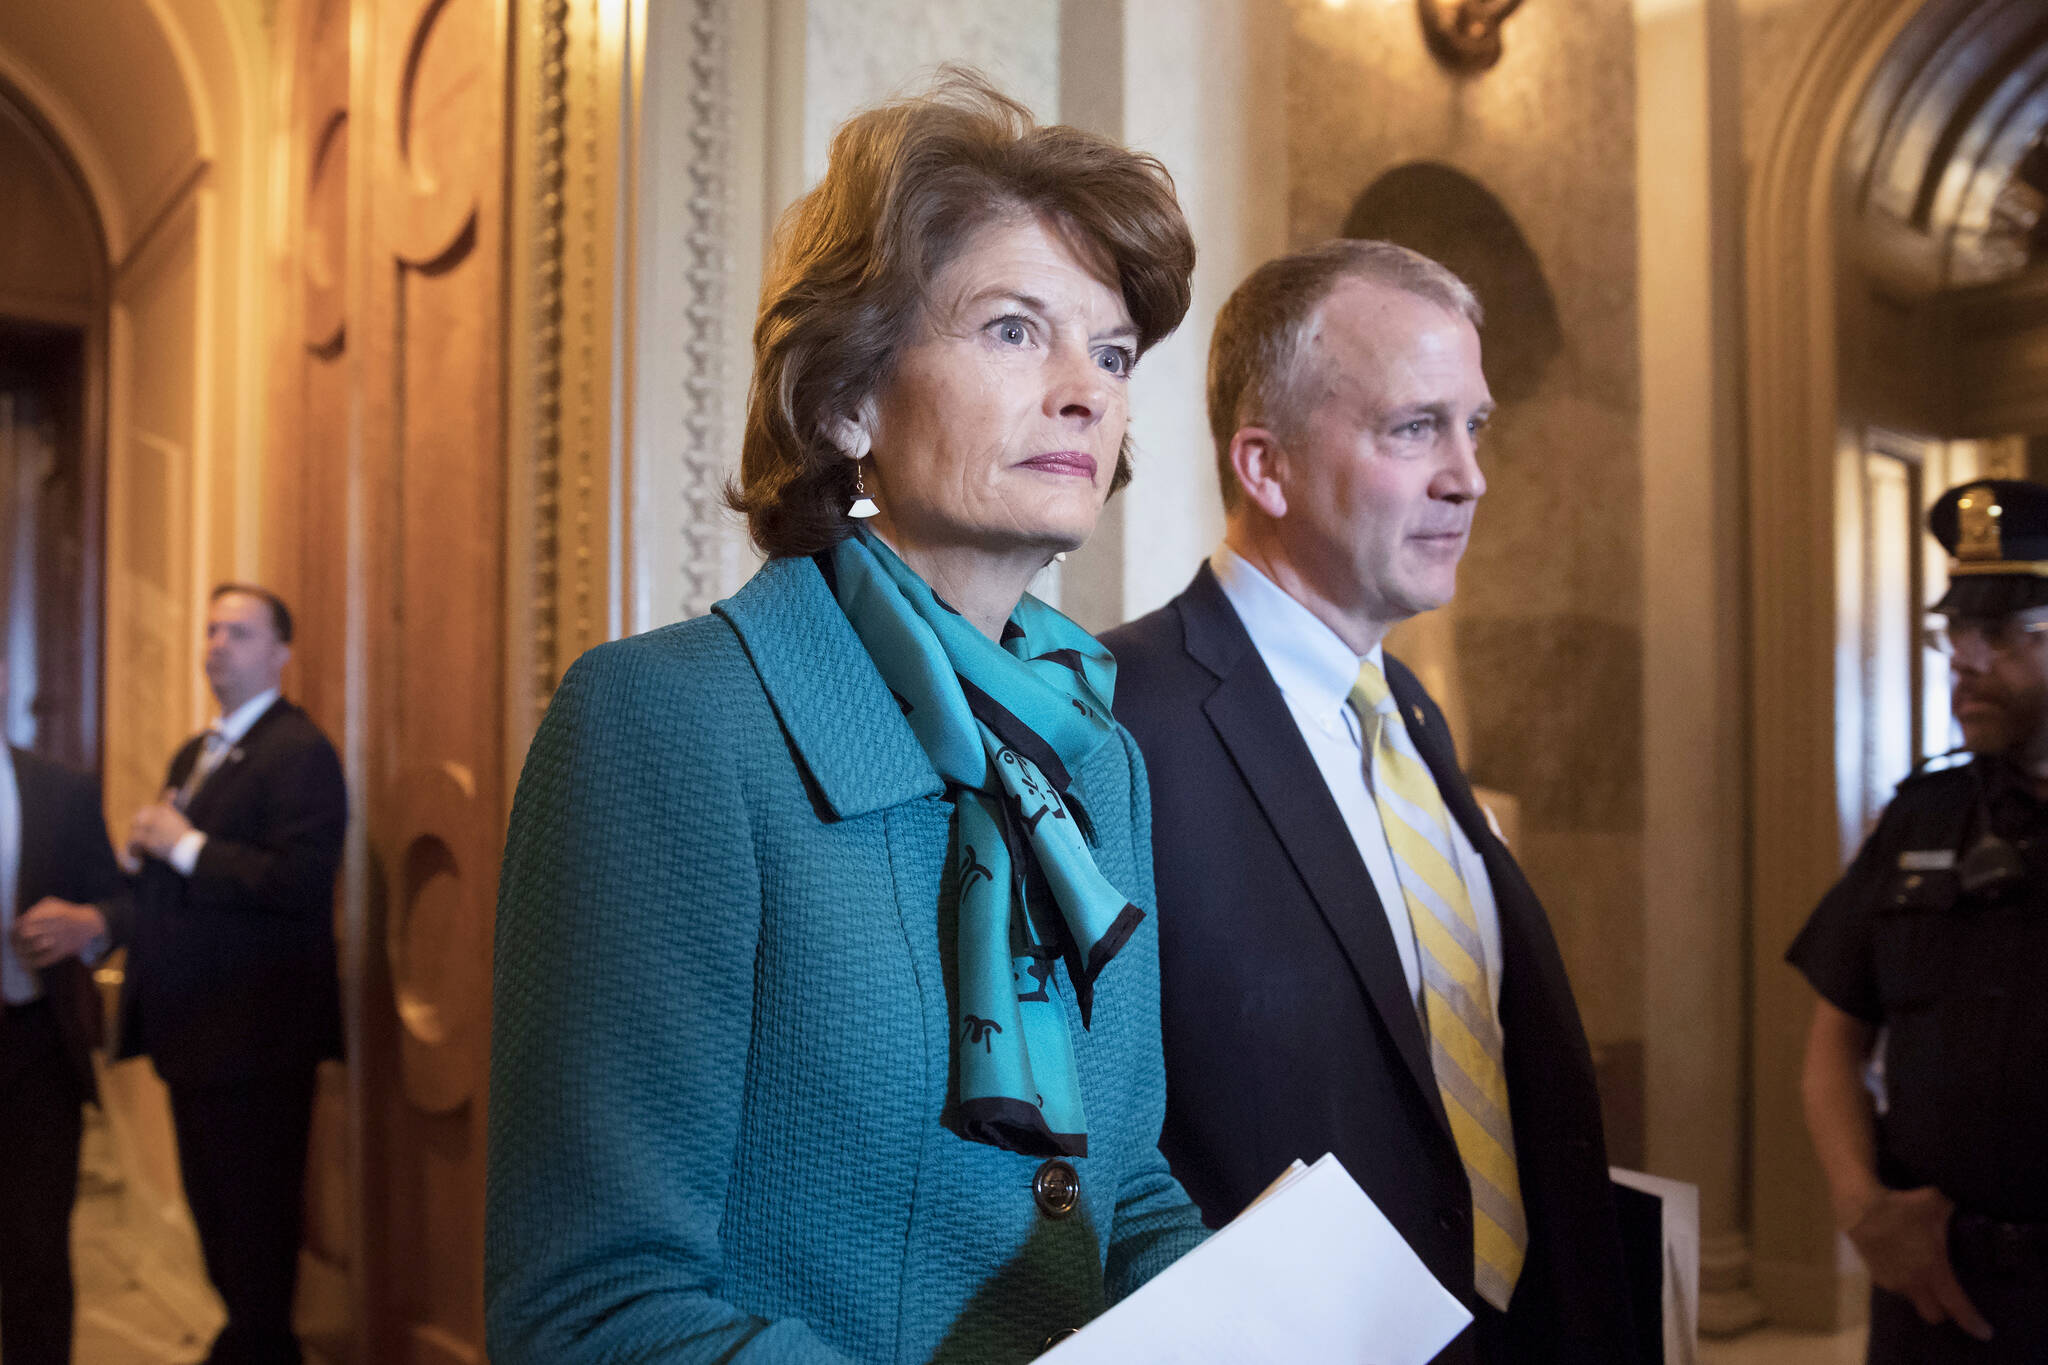 Sen. Lisa Murkowski, R-Alaska, left, and Sen. Dan Sullivan, R-Alaska, leave the chamber after a vote on Capitol Hill in Washington on May 10, 2017. Two Russians who said they fled the country to avoid compulsory military service have requested asylum in the U.S. after landing on a remote Alaskan island in the Bering Sea, Alaska U.S. Sen. Lisa Murkowski’s office said Thursday, Oct. 6, 2022. (AP Photo/J. Scott Applewhite, File)